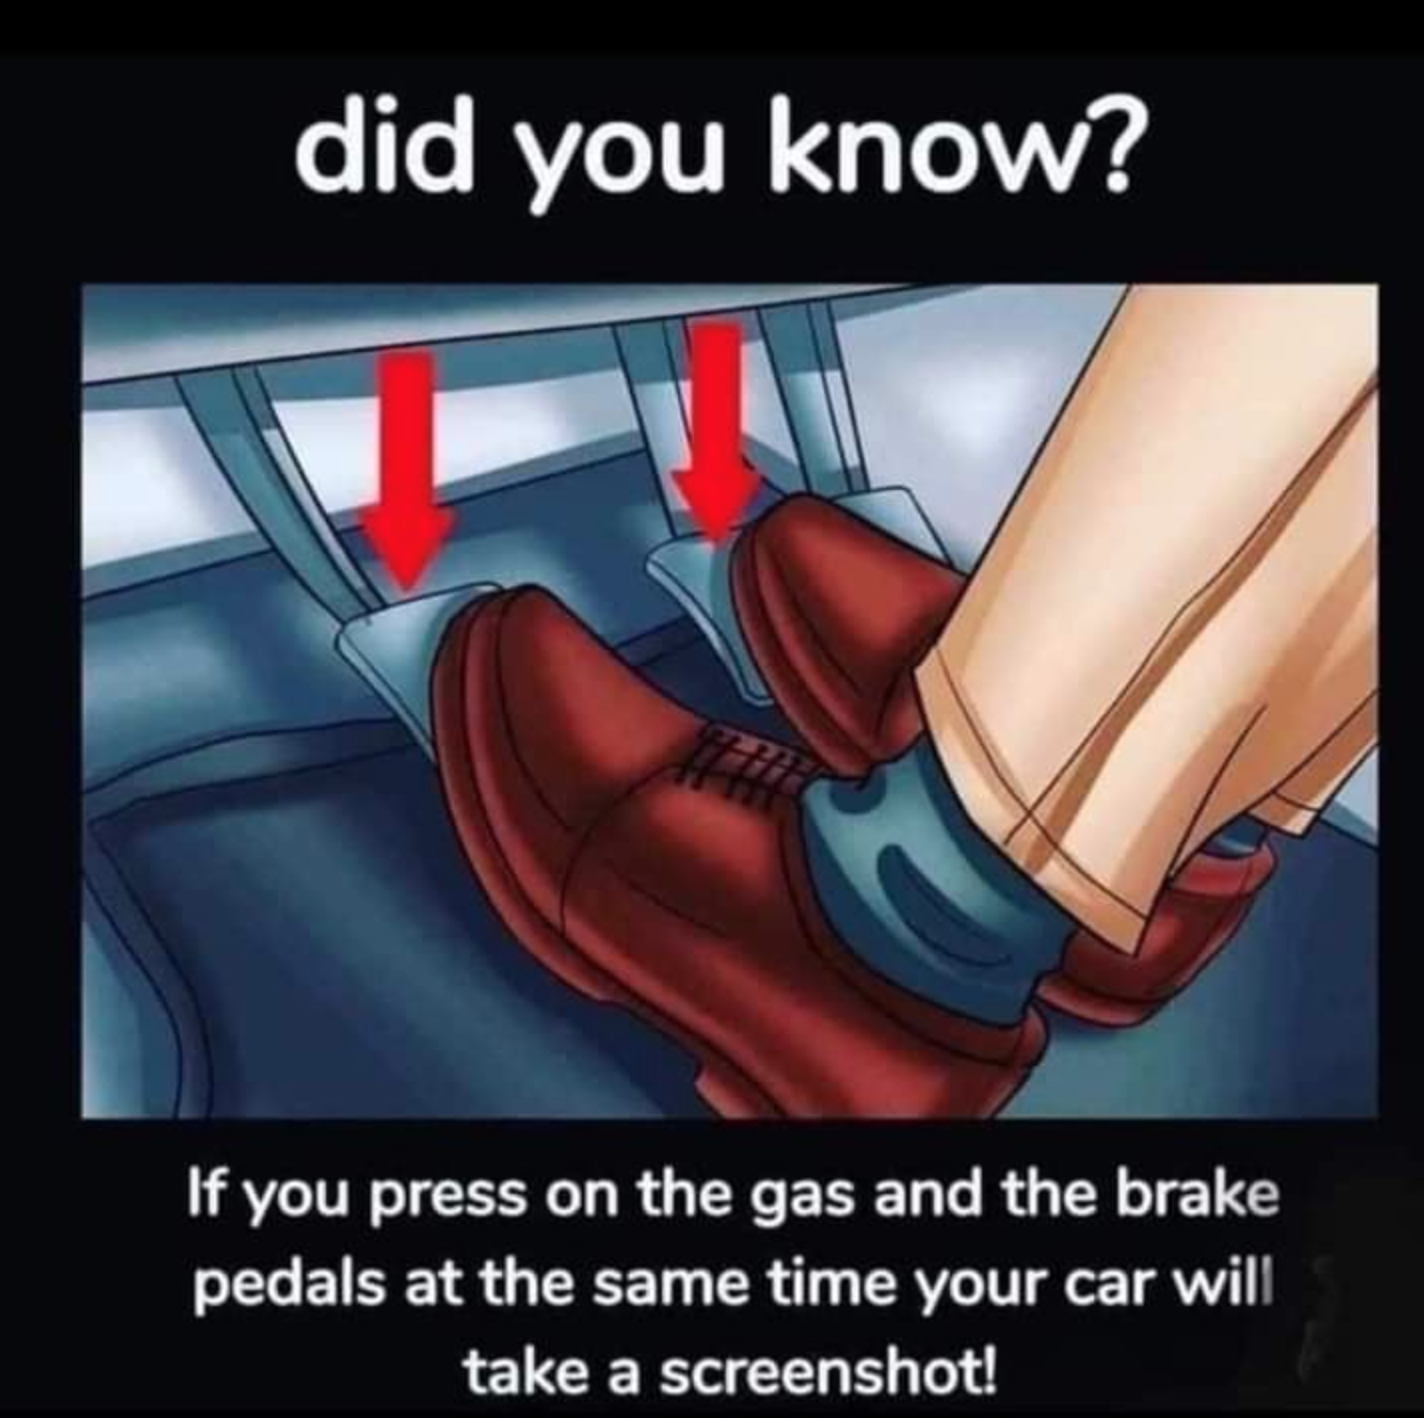 if you press on the gas - did you know? If you press on the gas and the brake pedals at the same time your car will take a screenshot!